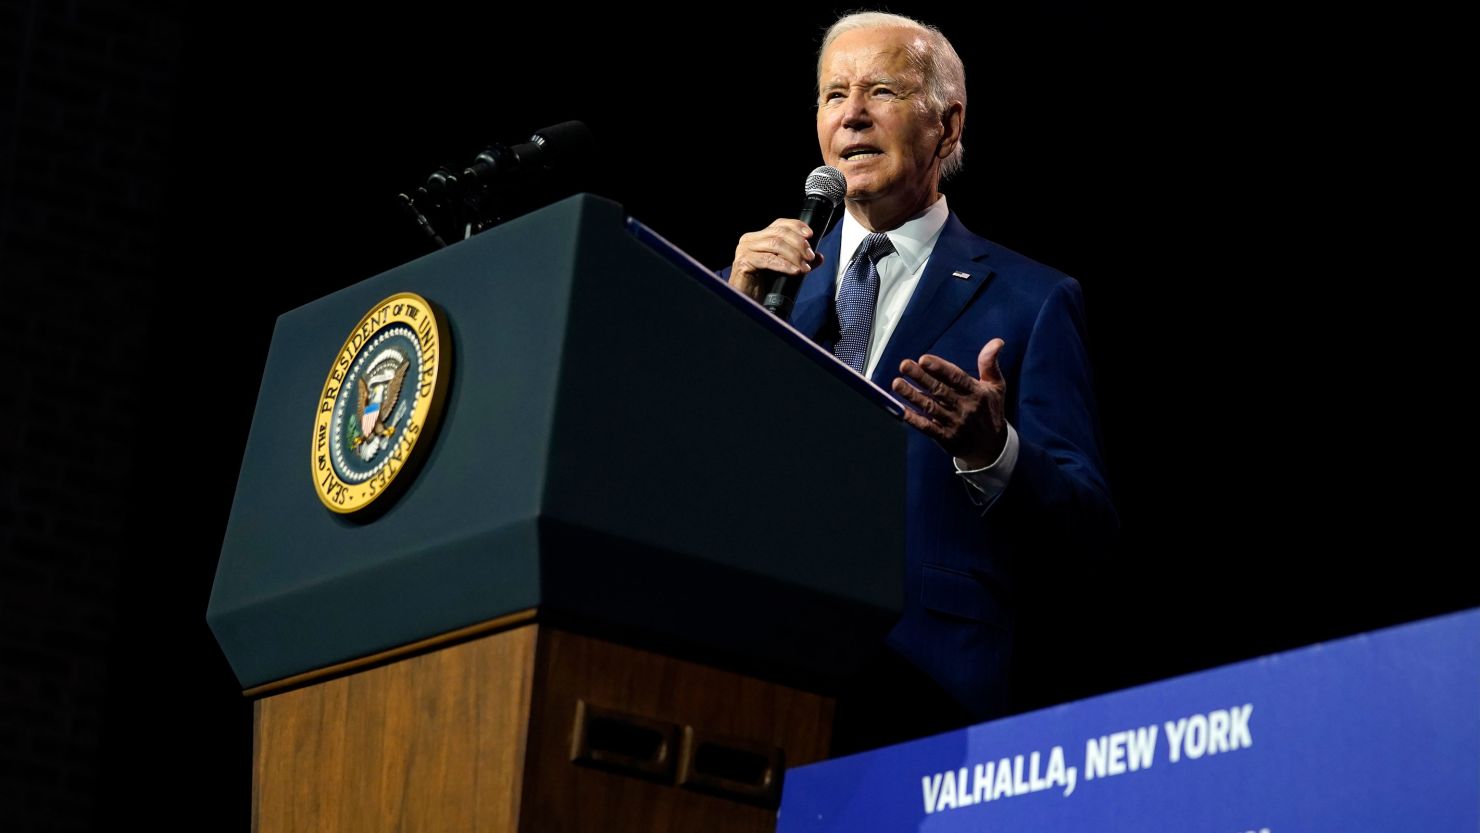 President Joe Biden speaks on the debt limit during an event at SUNY Westchester Community College on Wednesday, May 10, in Valhalla, New York.